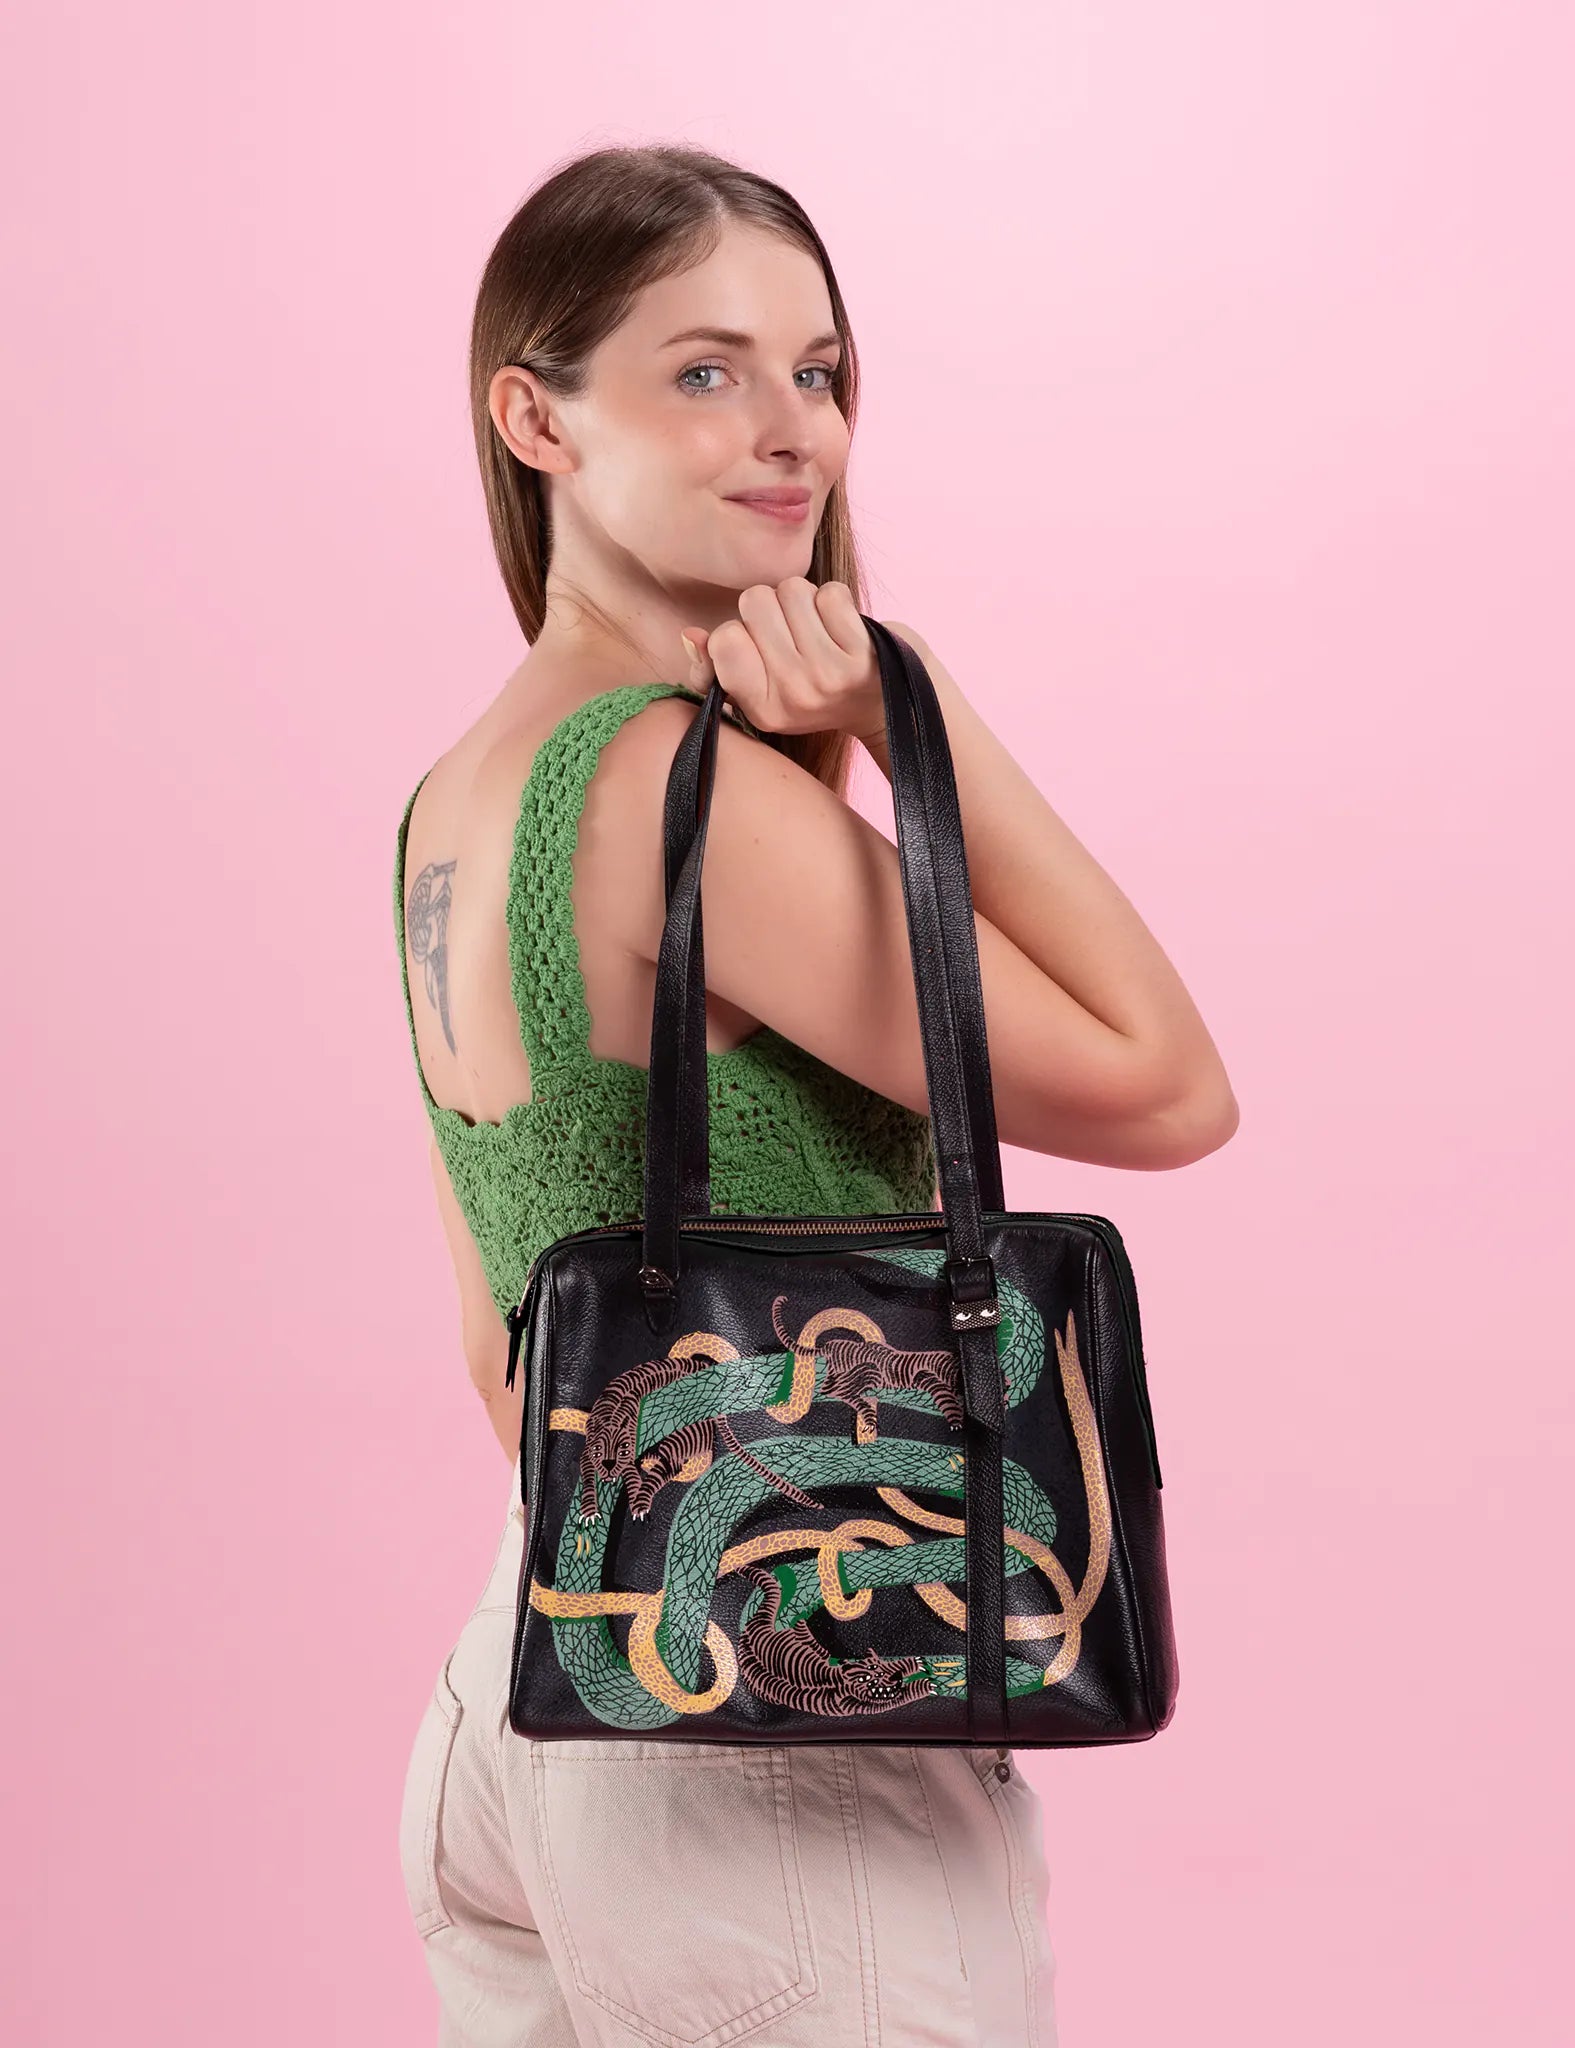 A woman with light skin and long brown hair is posing against a pink background. She is wearing a green sleeveless top with a crochet-like texture and light-colored pants. She has a tattoo on her left shoulder blade and is holding an "Esther Black Duffle Bag - Tangle Tales Print" with two long straps. The handbag features a colorful print design of green snakes intertwined with tigers. The woman is smiling slightly and looking over her right shoulder at the camera.